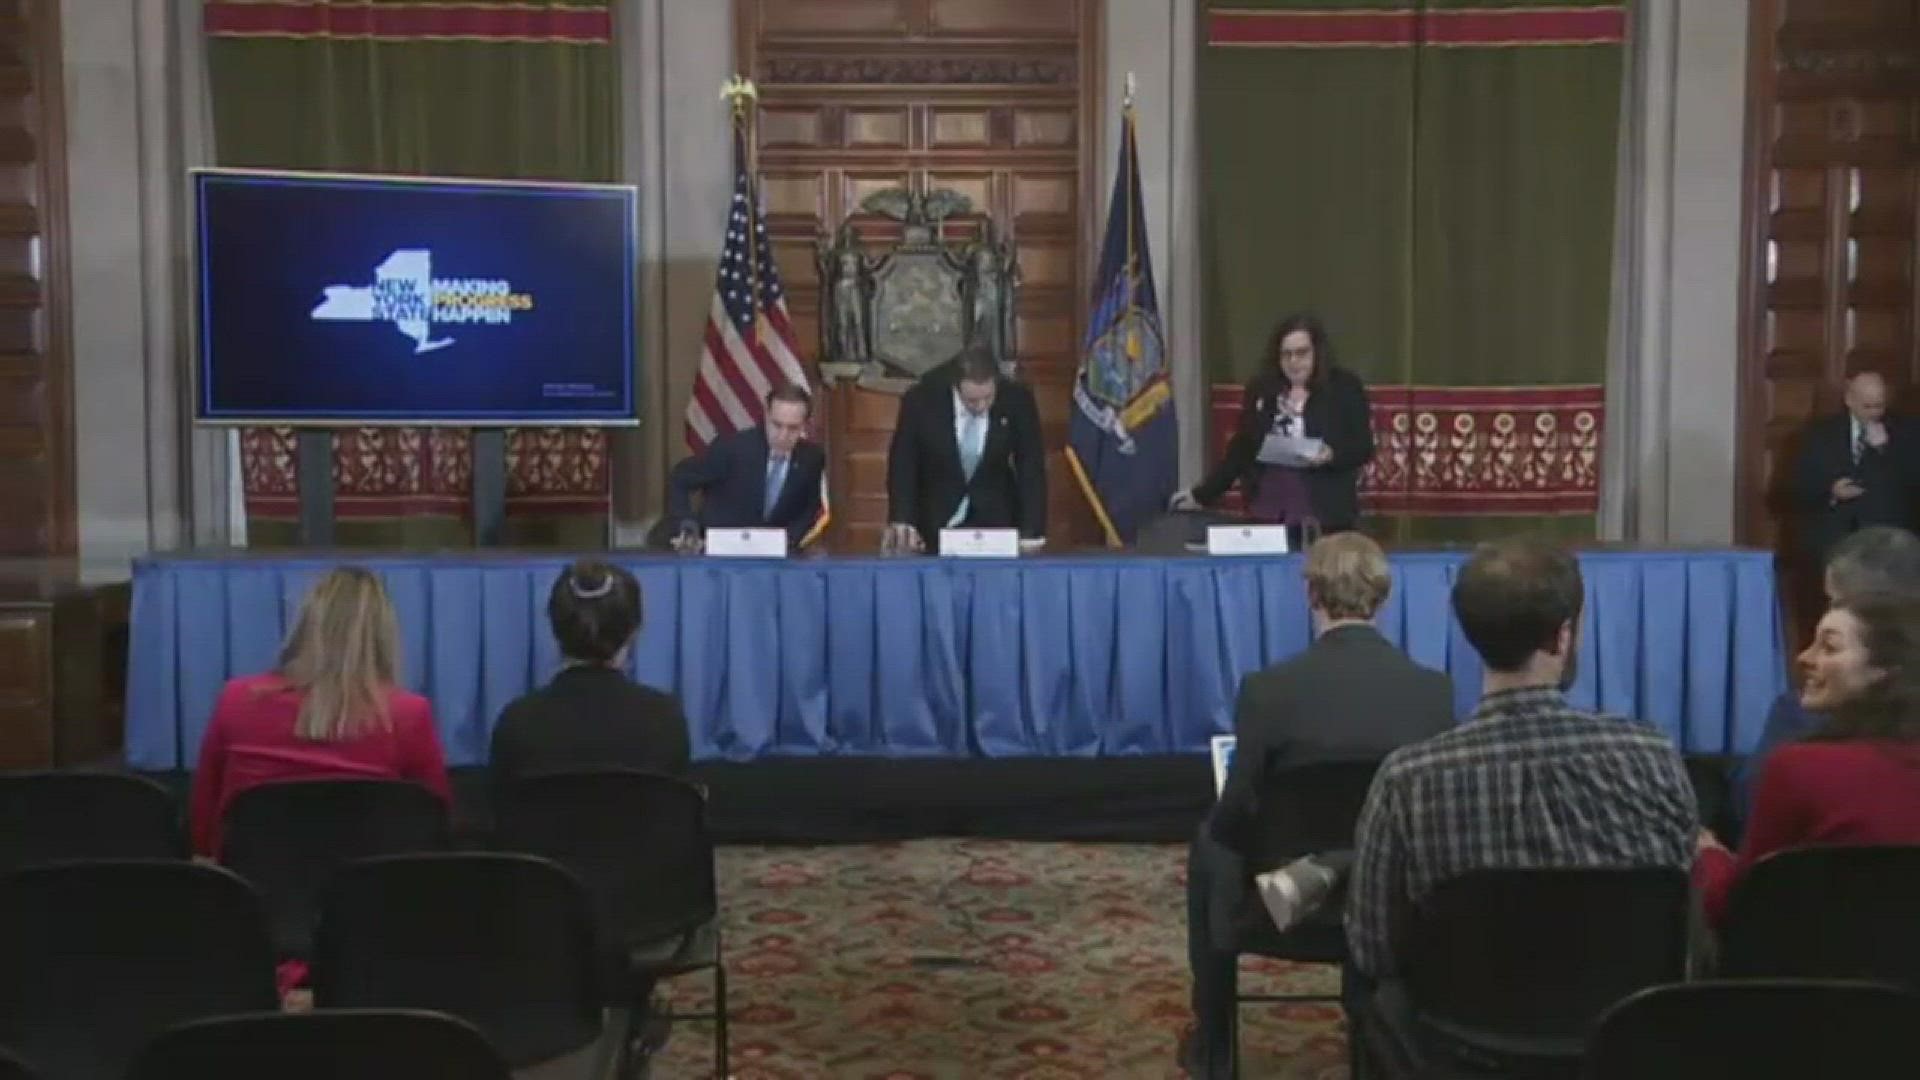 Gov. Cuomo announces 44 confirmed cases of coronavirus in NYS.  At this time, there are no confirmed cases in WNY